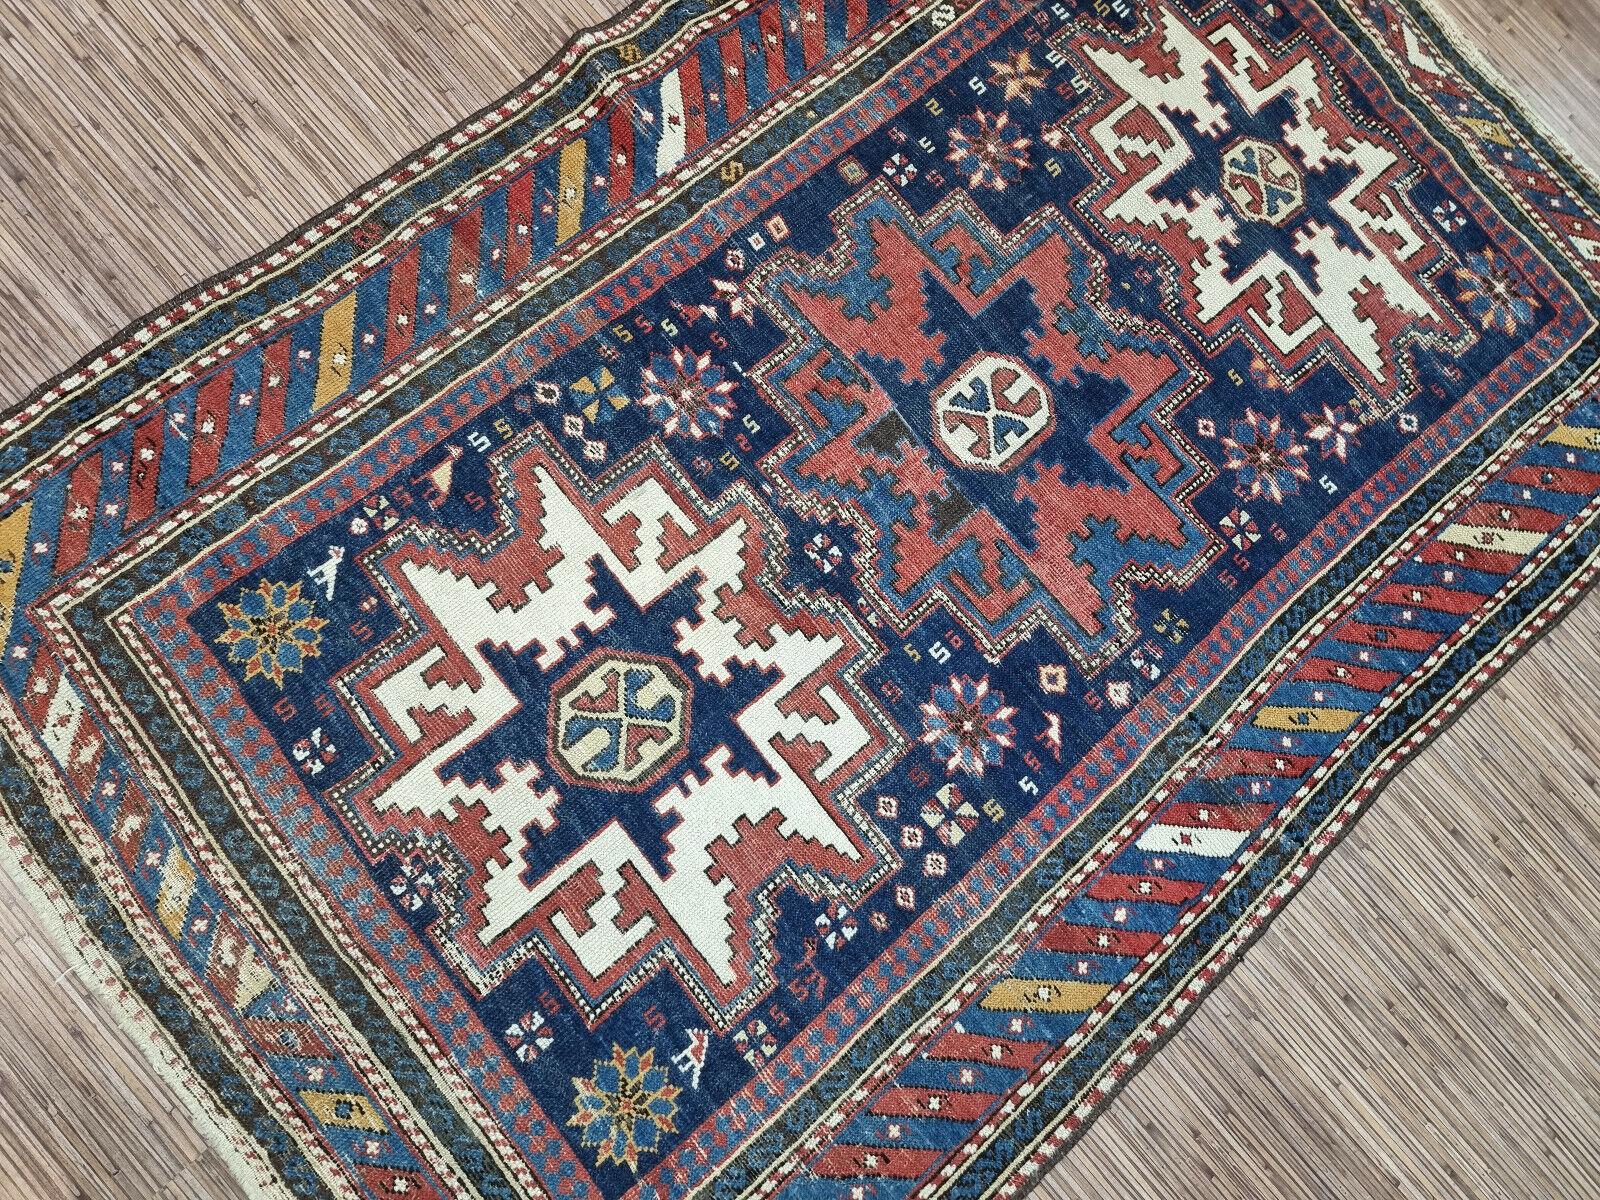 Dive into the rich, vibrant hues and intricate designs of this exquisite Handmade Antique Caucasian Shirvan Rug. Measuring at a generous 3.4’ x 5.2’, this masterpiece from the 1900s is a testament to the timeless allure of handcrafted